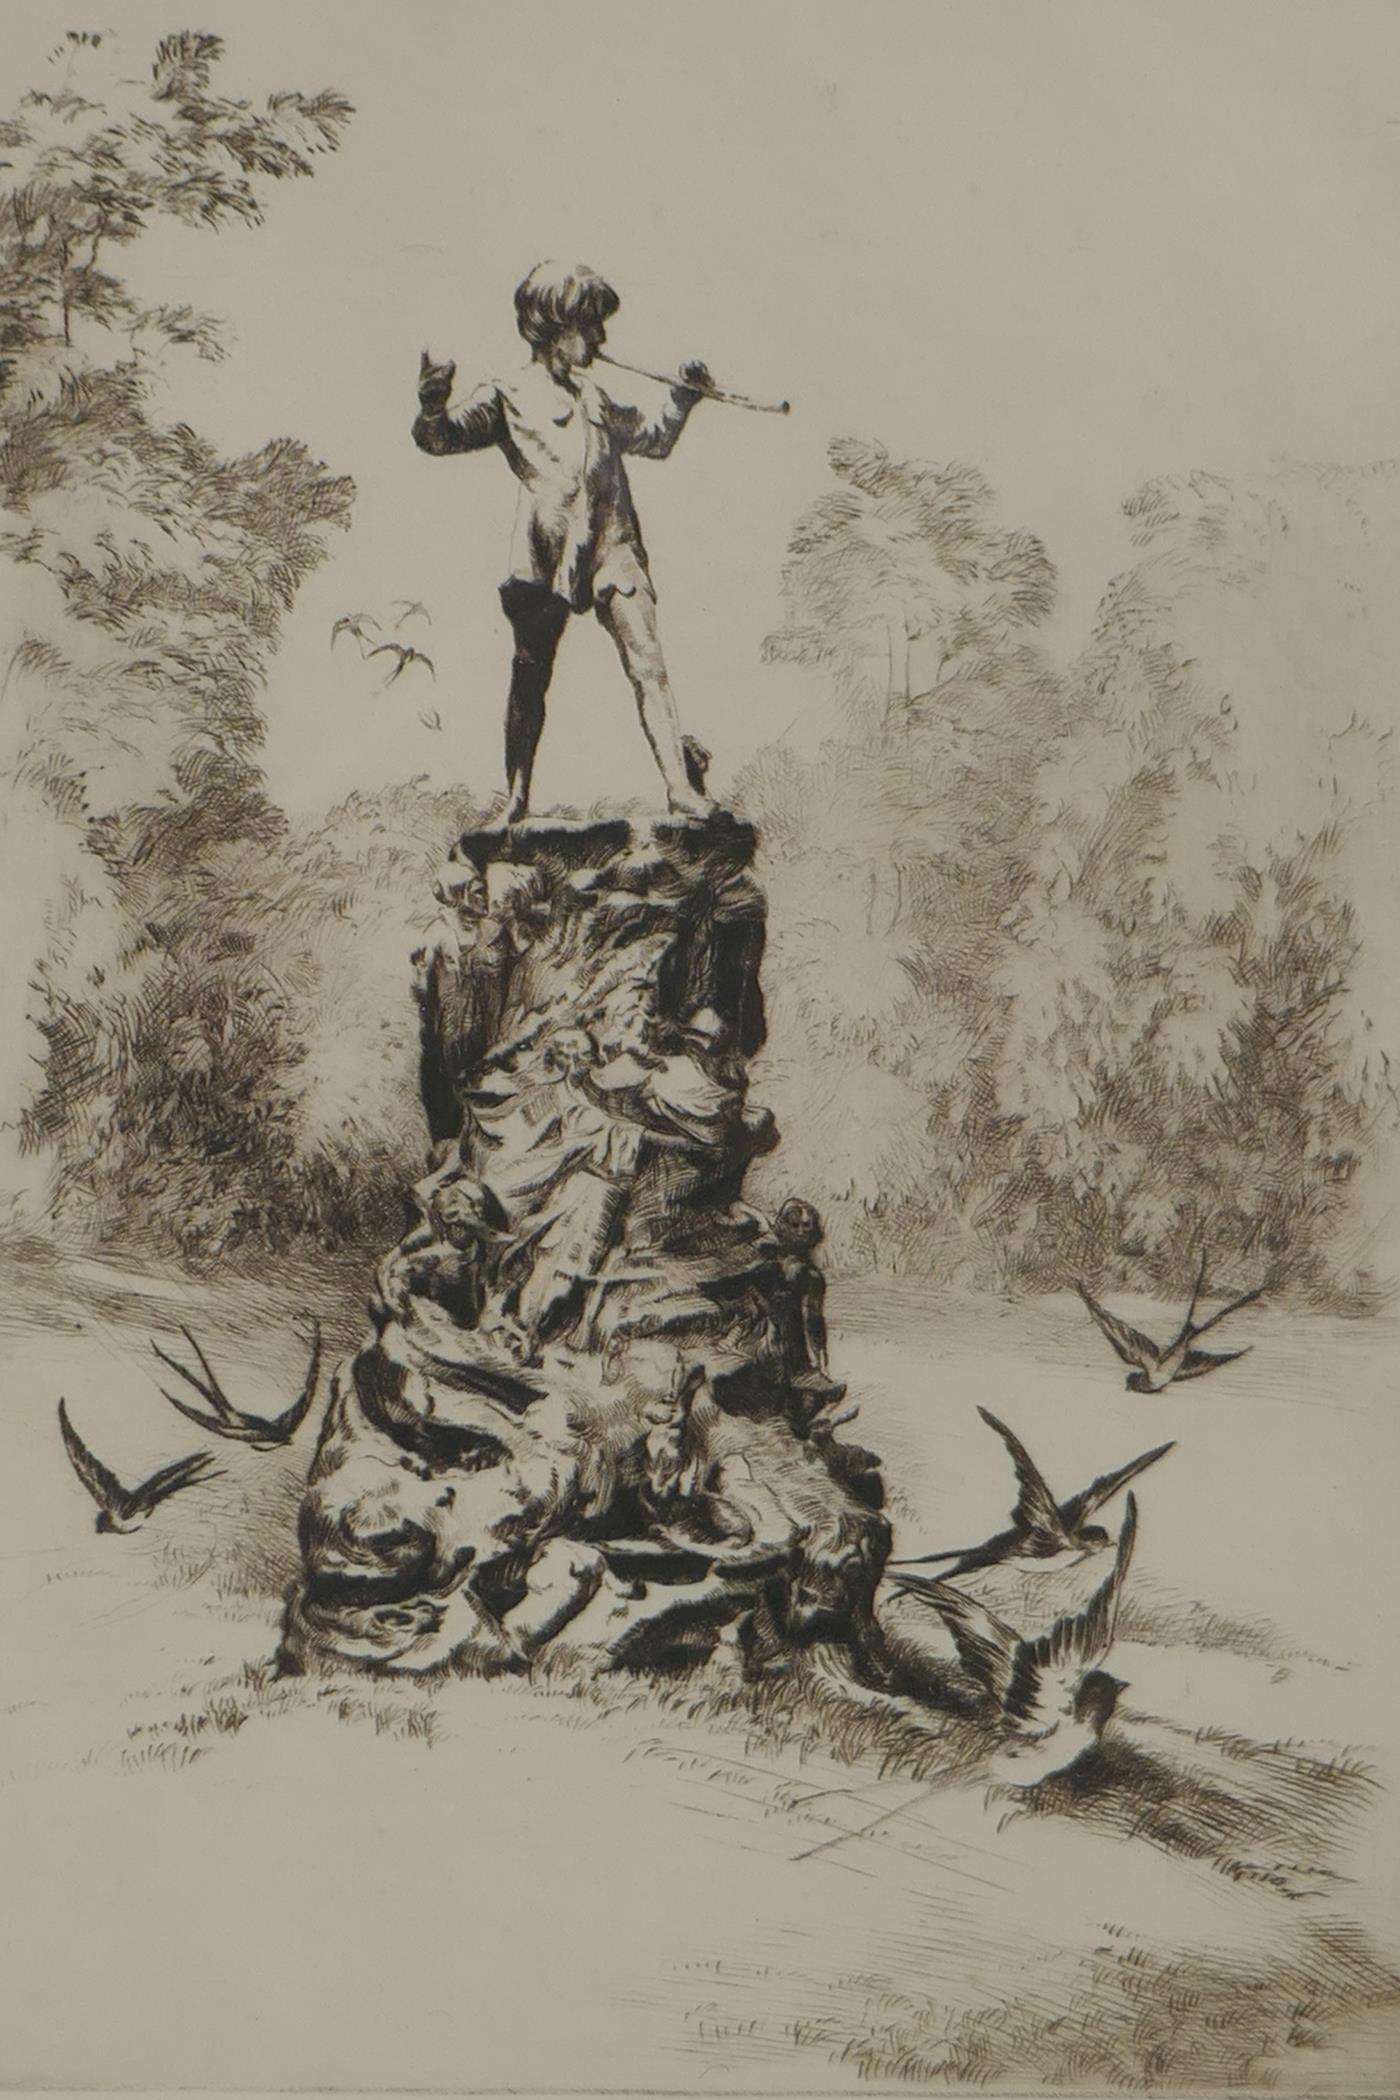 An early C20th engraving of the Peter Pan Statue after George Frampton and J.M. Barrie, indistinctly